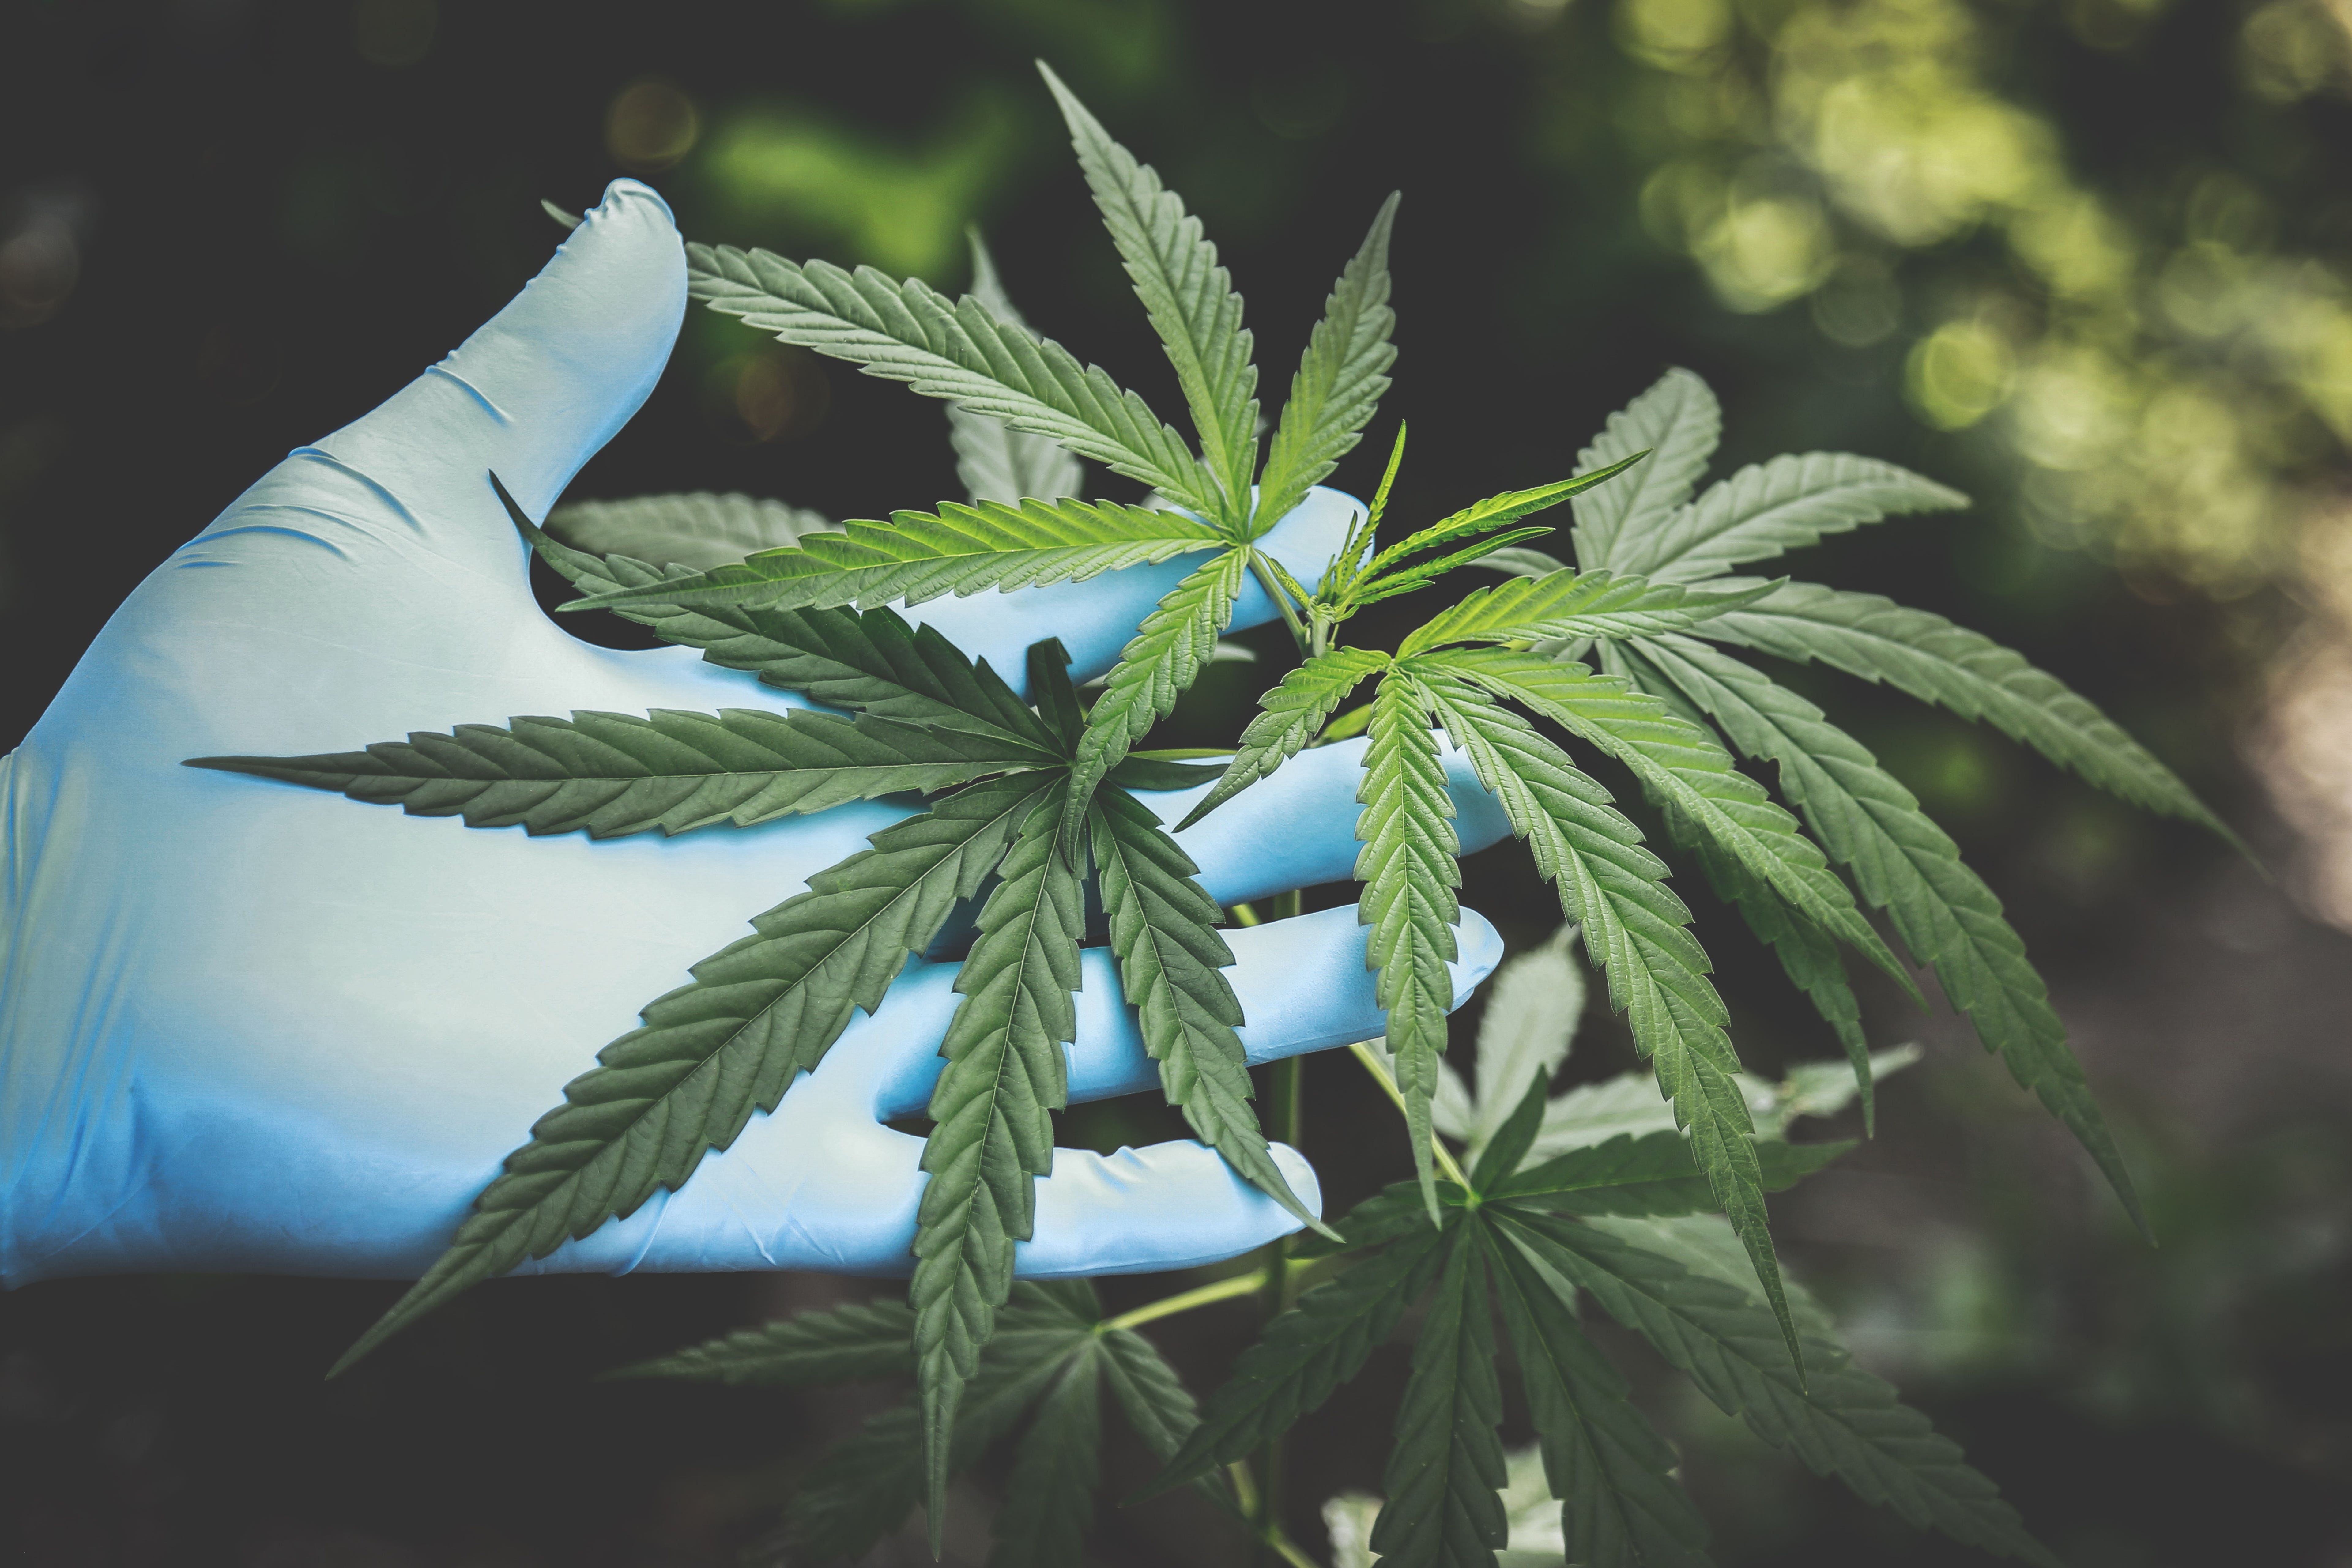 Cannabis Industry Leaders Discuss Innovation, Emerging Trends